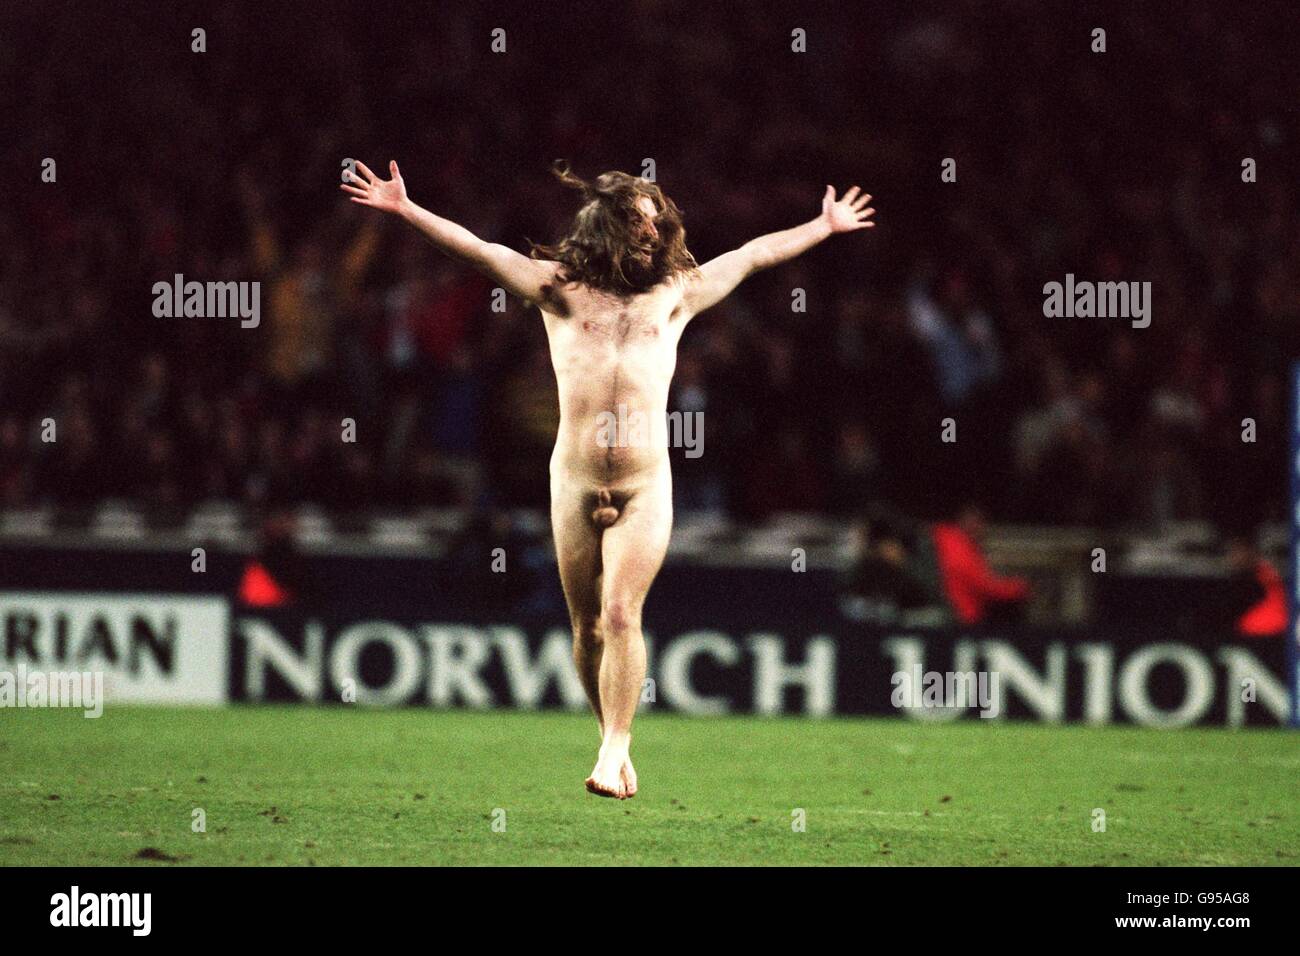 Rugby Union - Test Match - Wales v South Africa. A streaker revels in the spotlight of test rugby Stock Photo